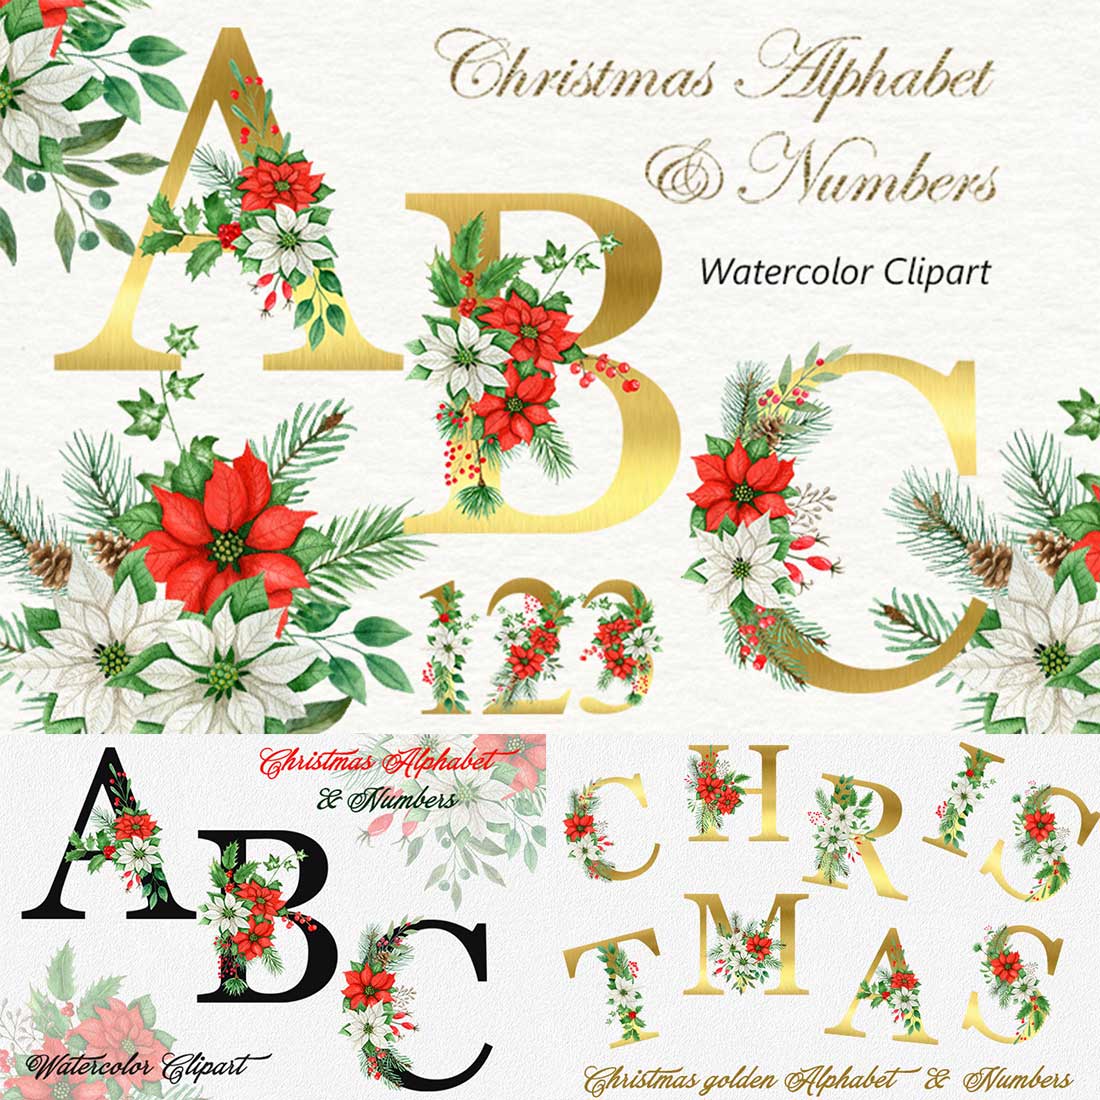 Christmas Watercolor Floral Alphabet cover image.